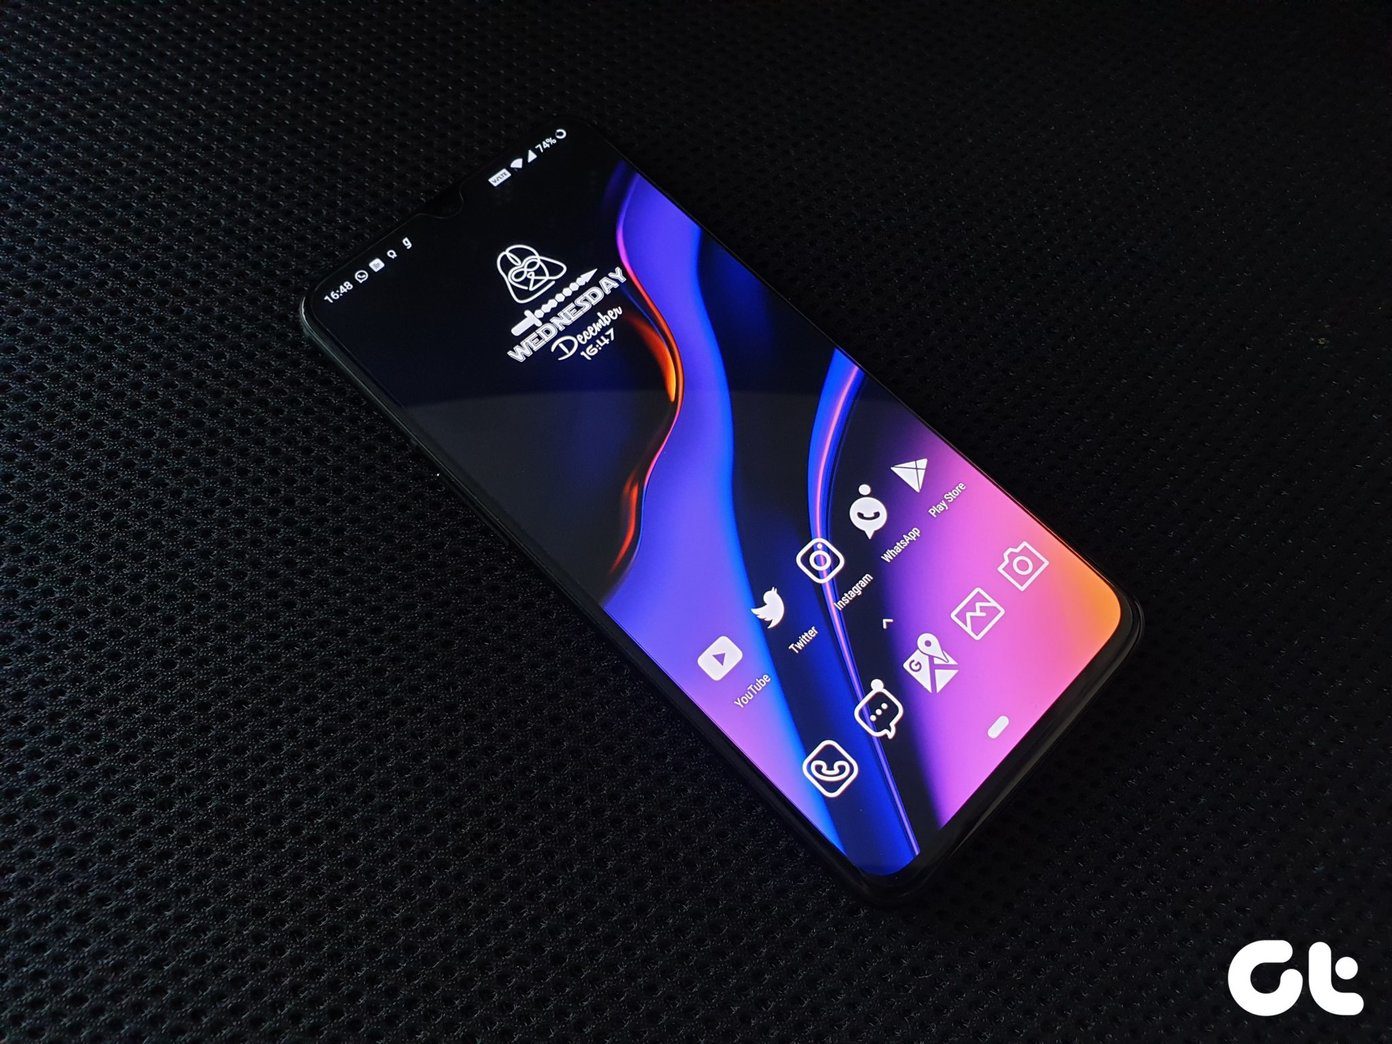 6 Best Lock Screen and Home Screen Tips for OnePlus 6T